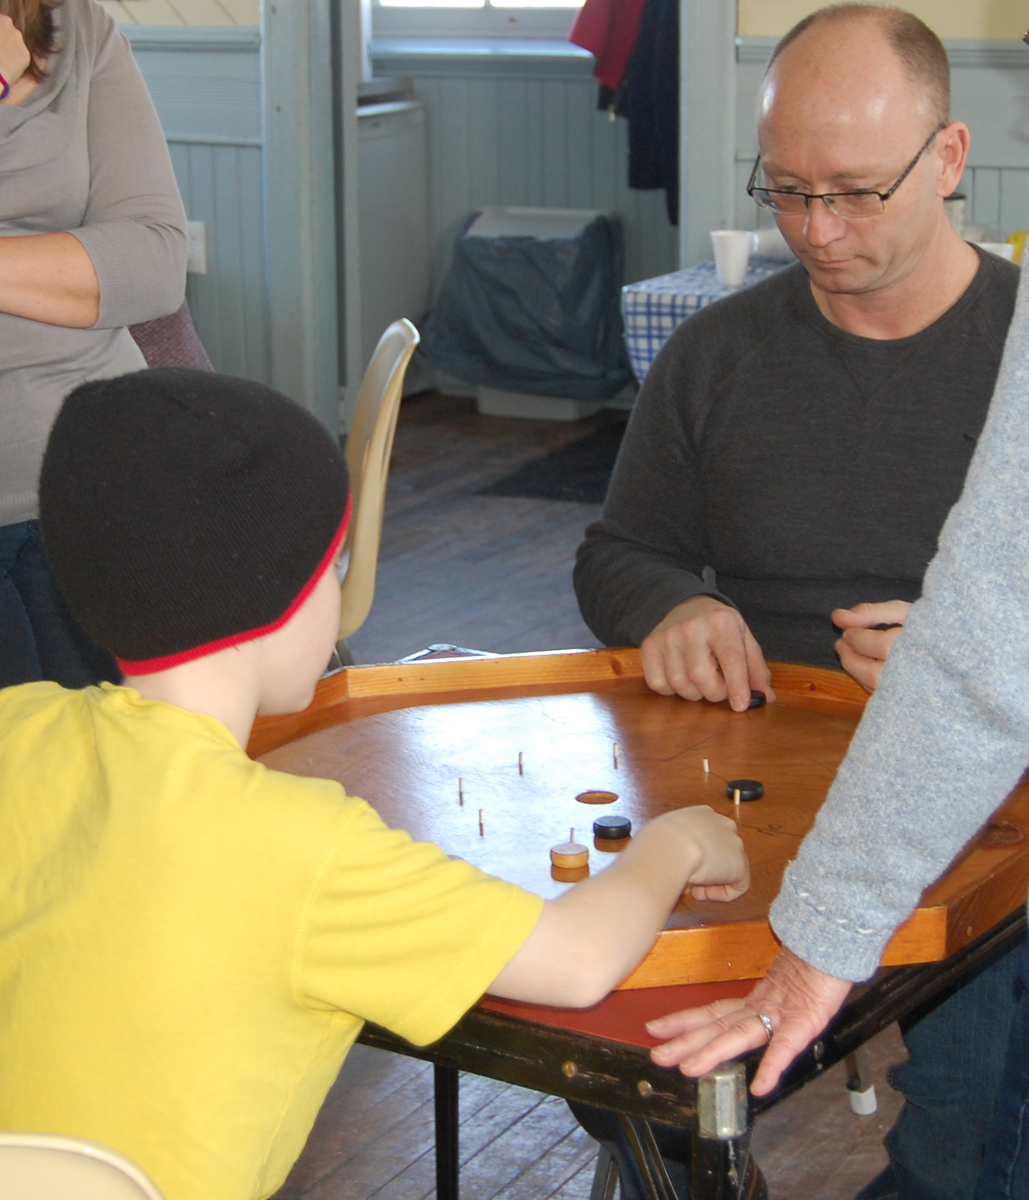 Father and son play crokinole